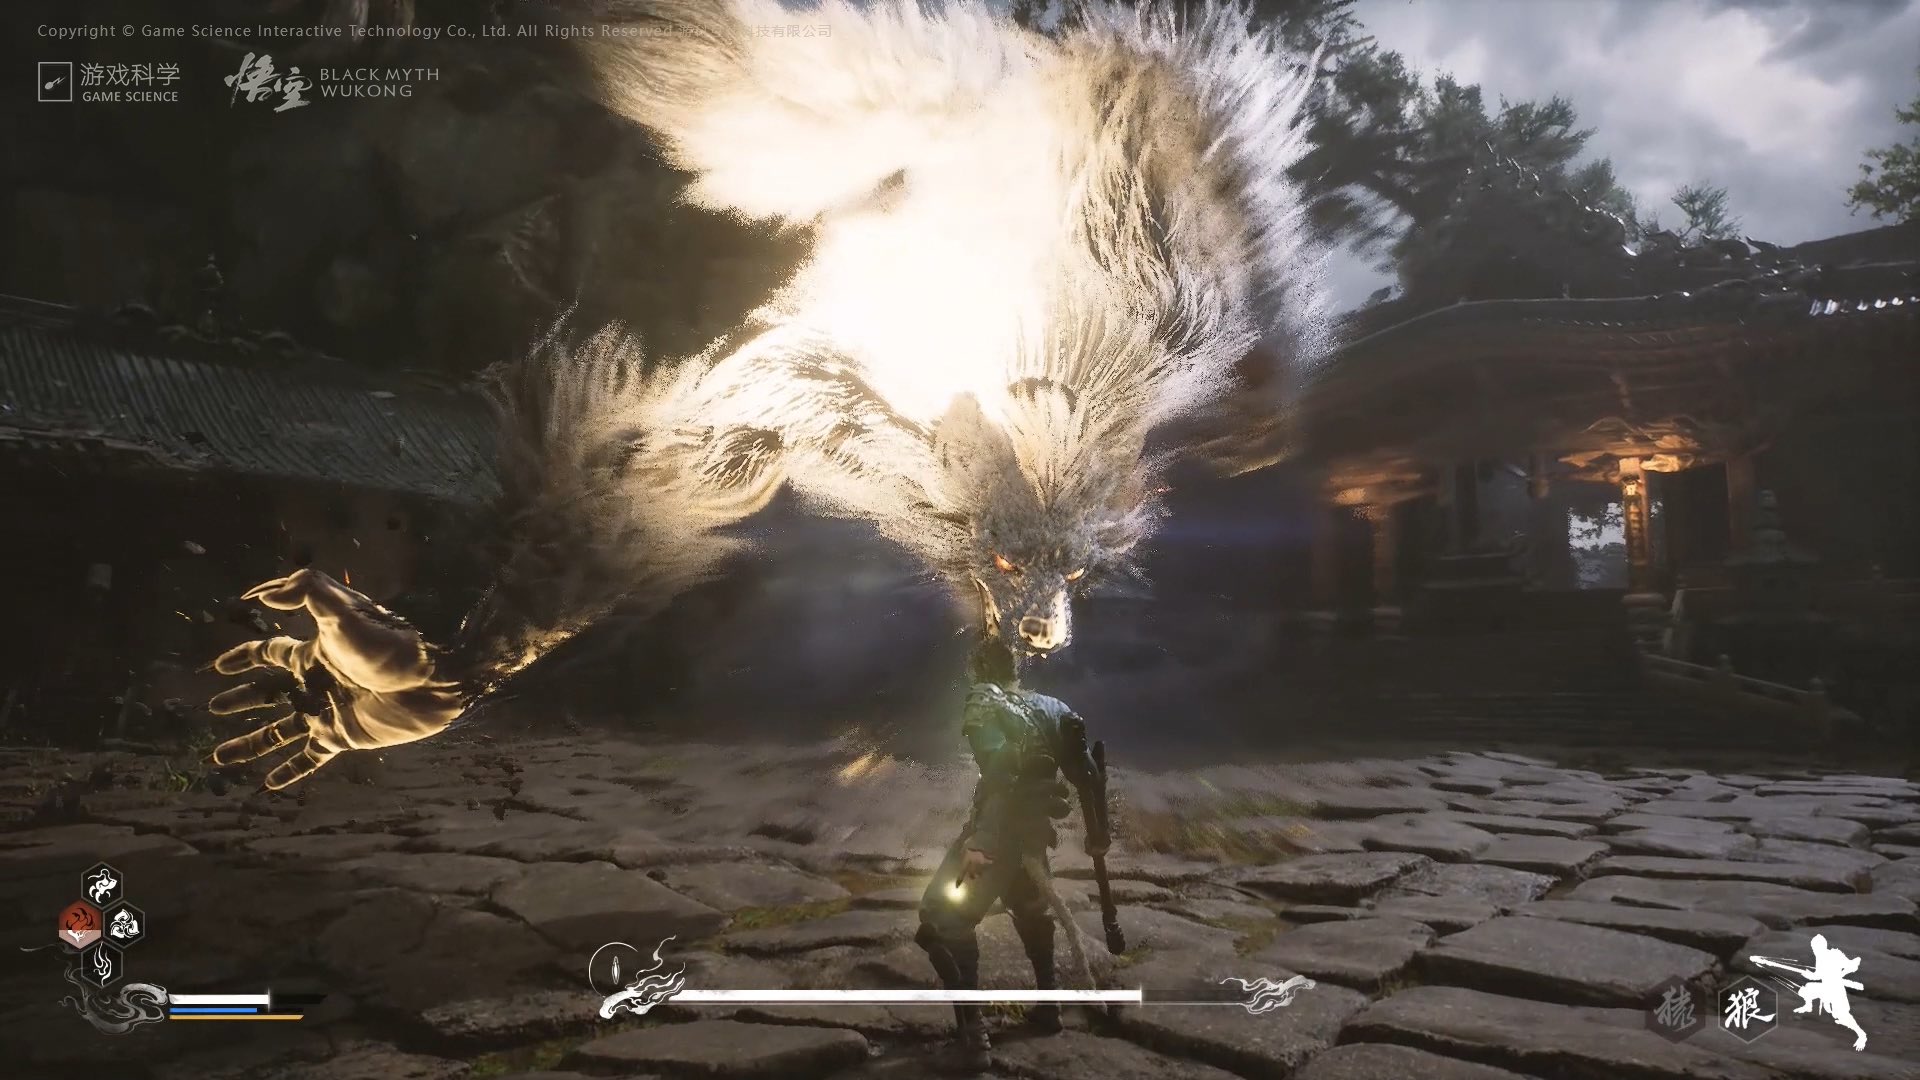 Screenshot from Black Myth: Wukong showing the Wolf Boss character